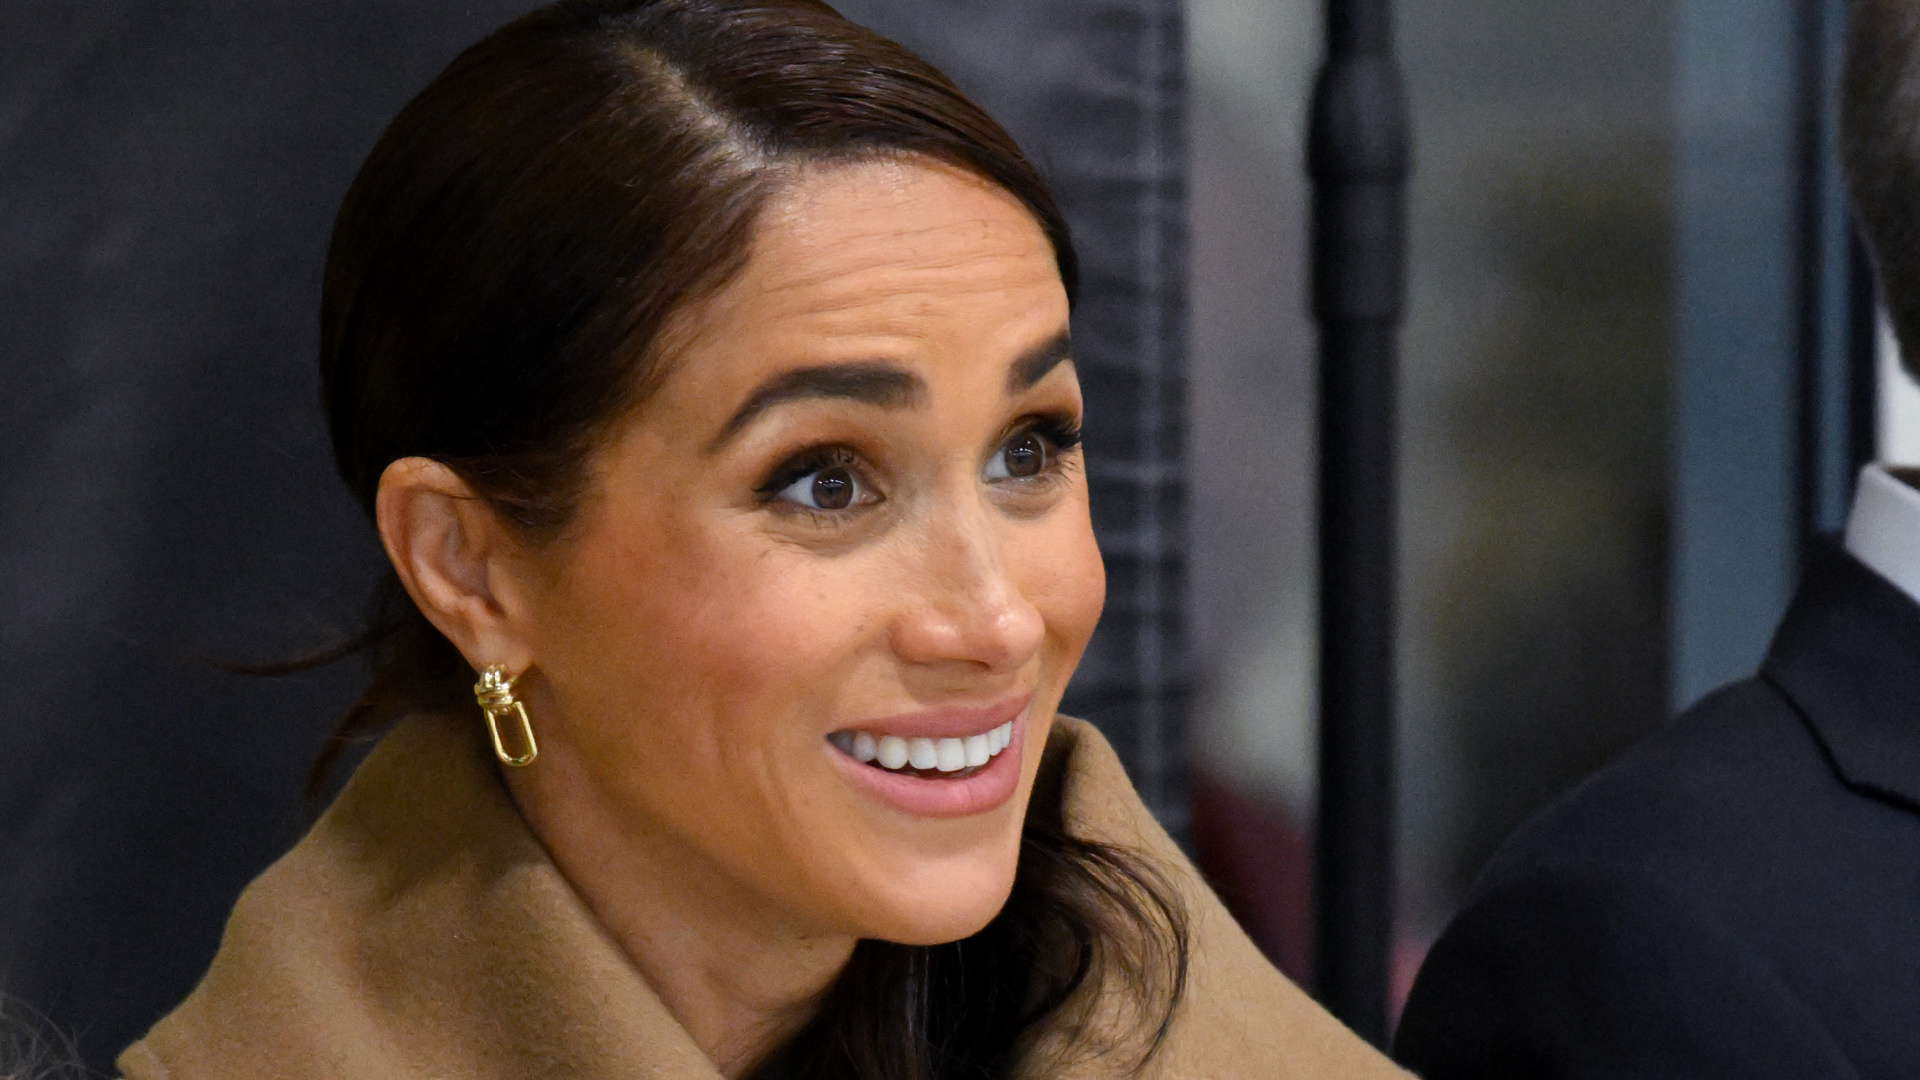 Meghan Markle could make a lot of money